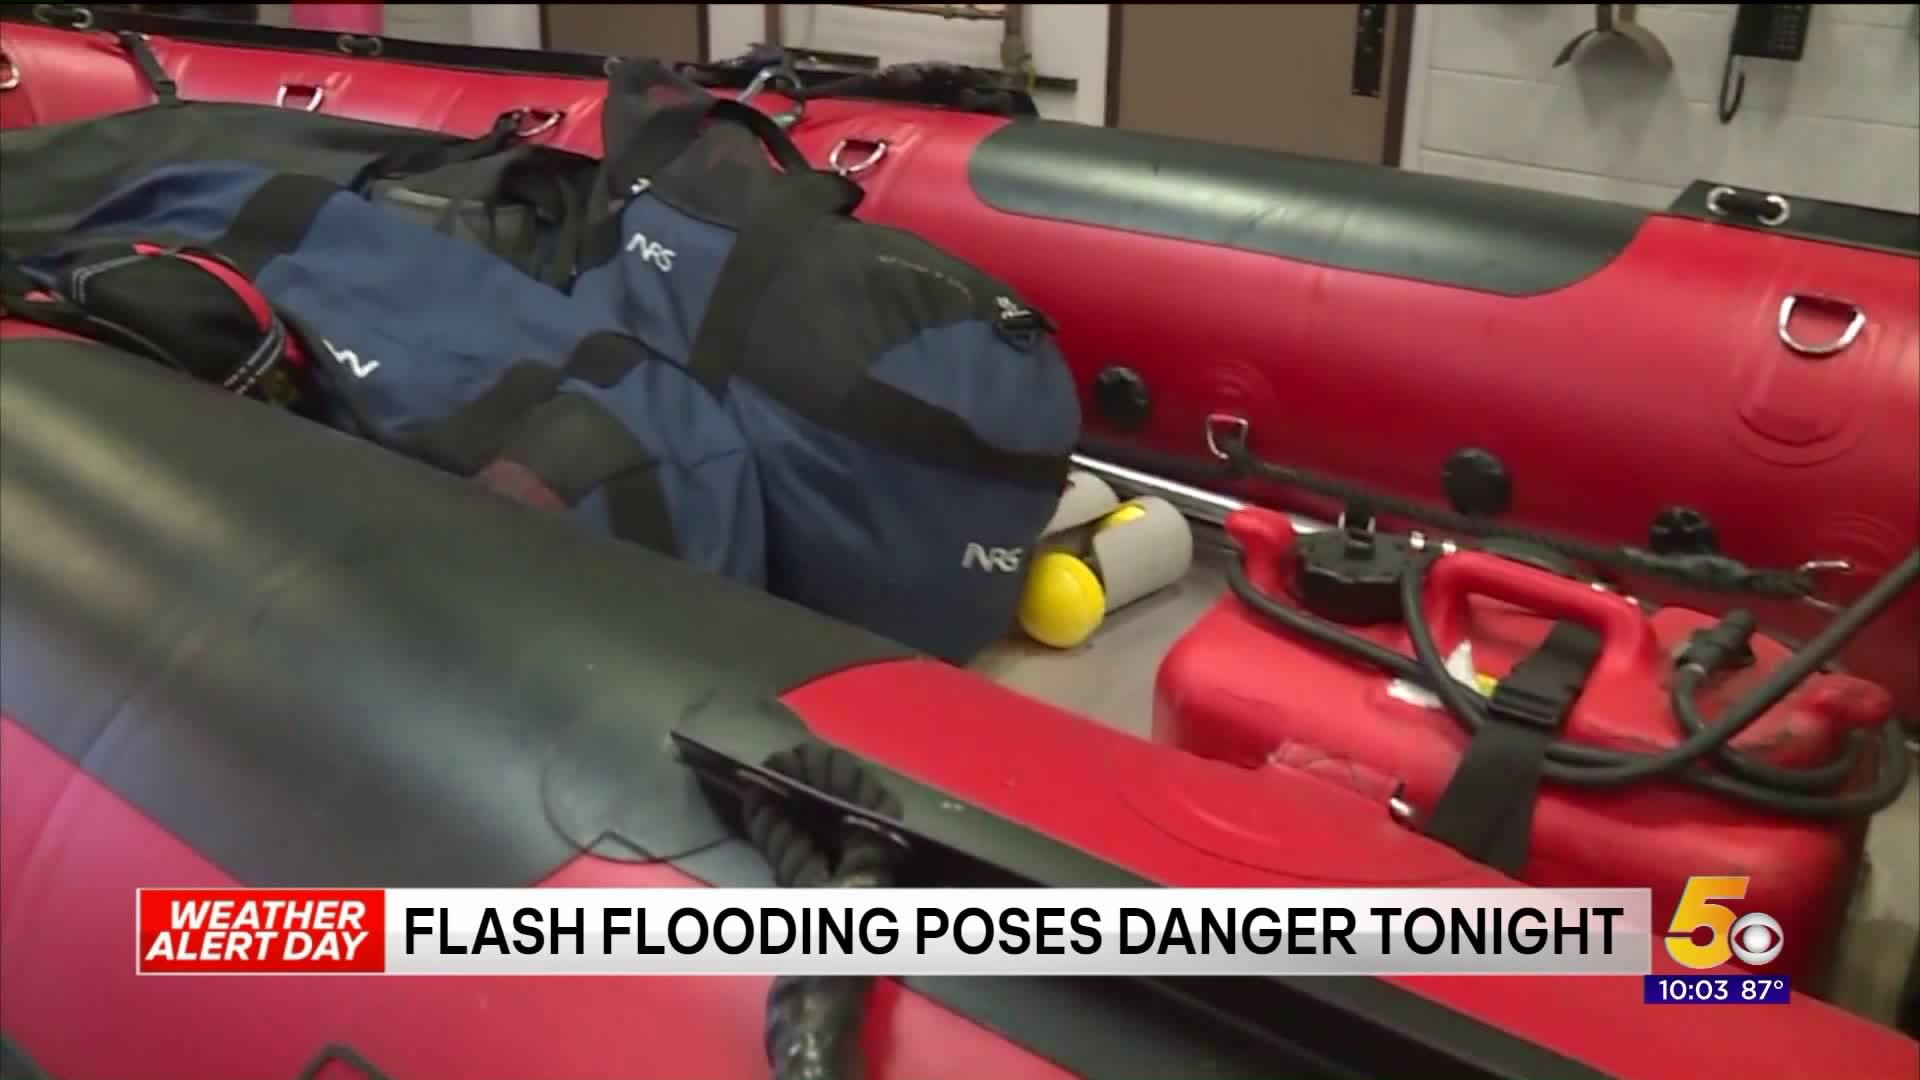 Rogers Fire Department Warning Drivers About The Dangers Of Flash Flooding